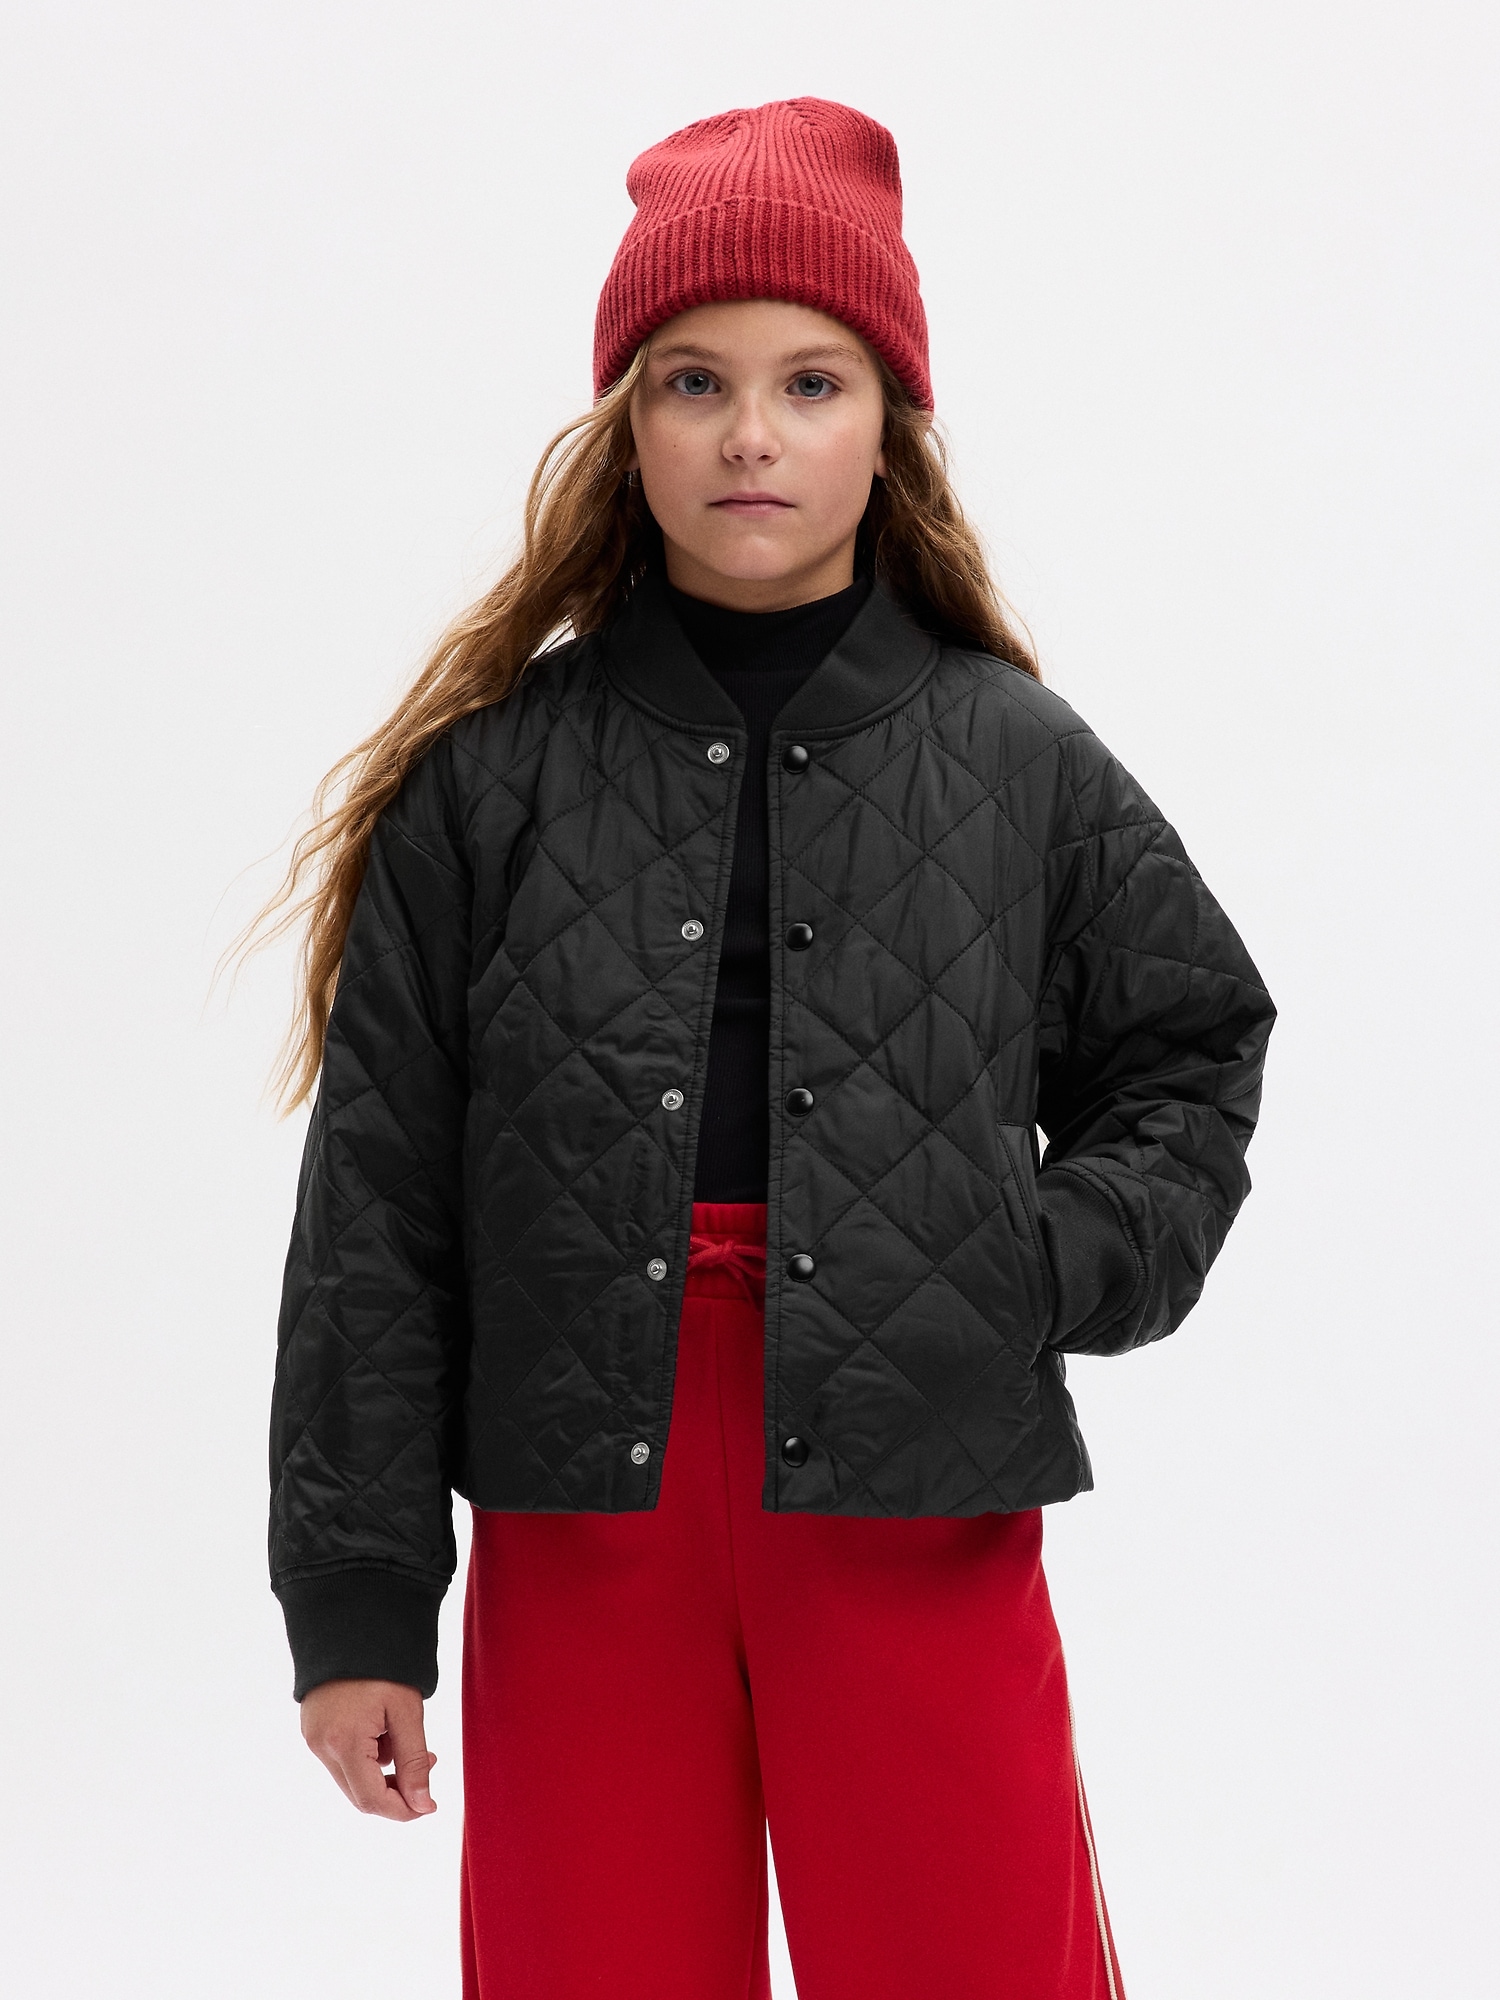 Kids Recycled Lightweight Quilted Puffer Jacket | Gap